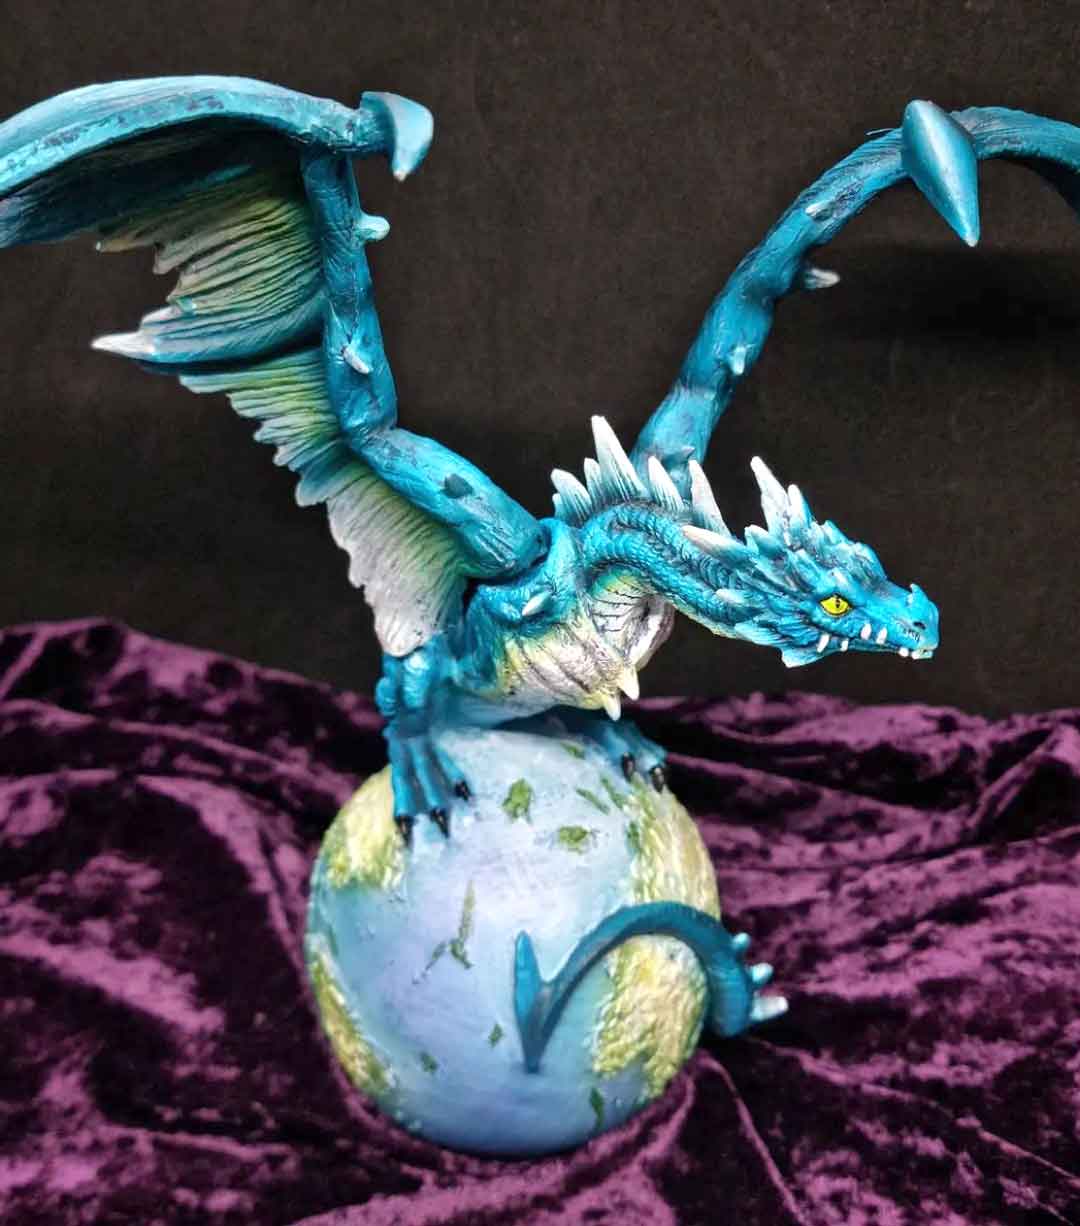 A blue dragon, wings outstretched, sitting on a globe of the world